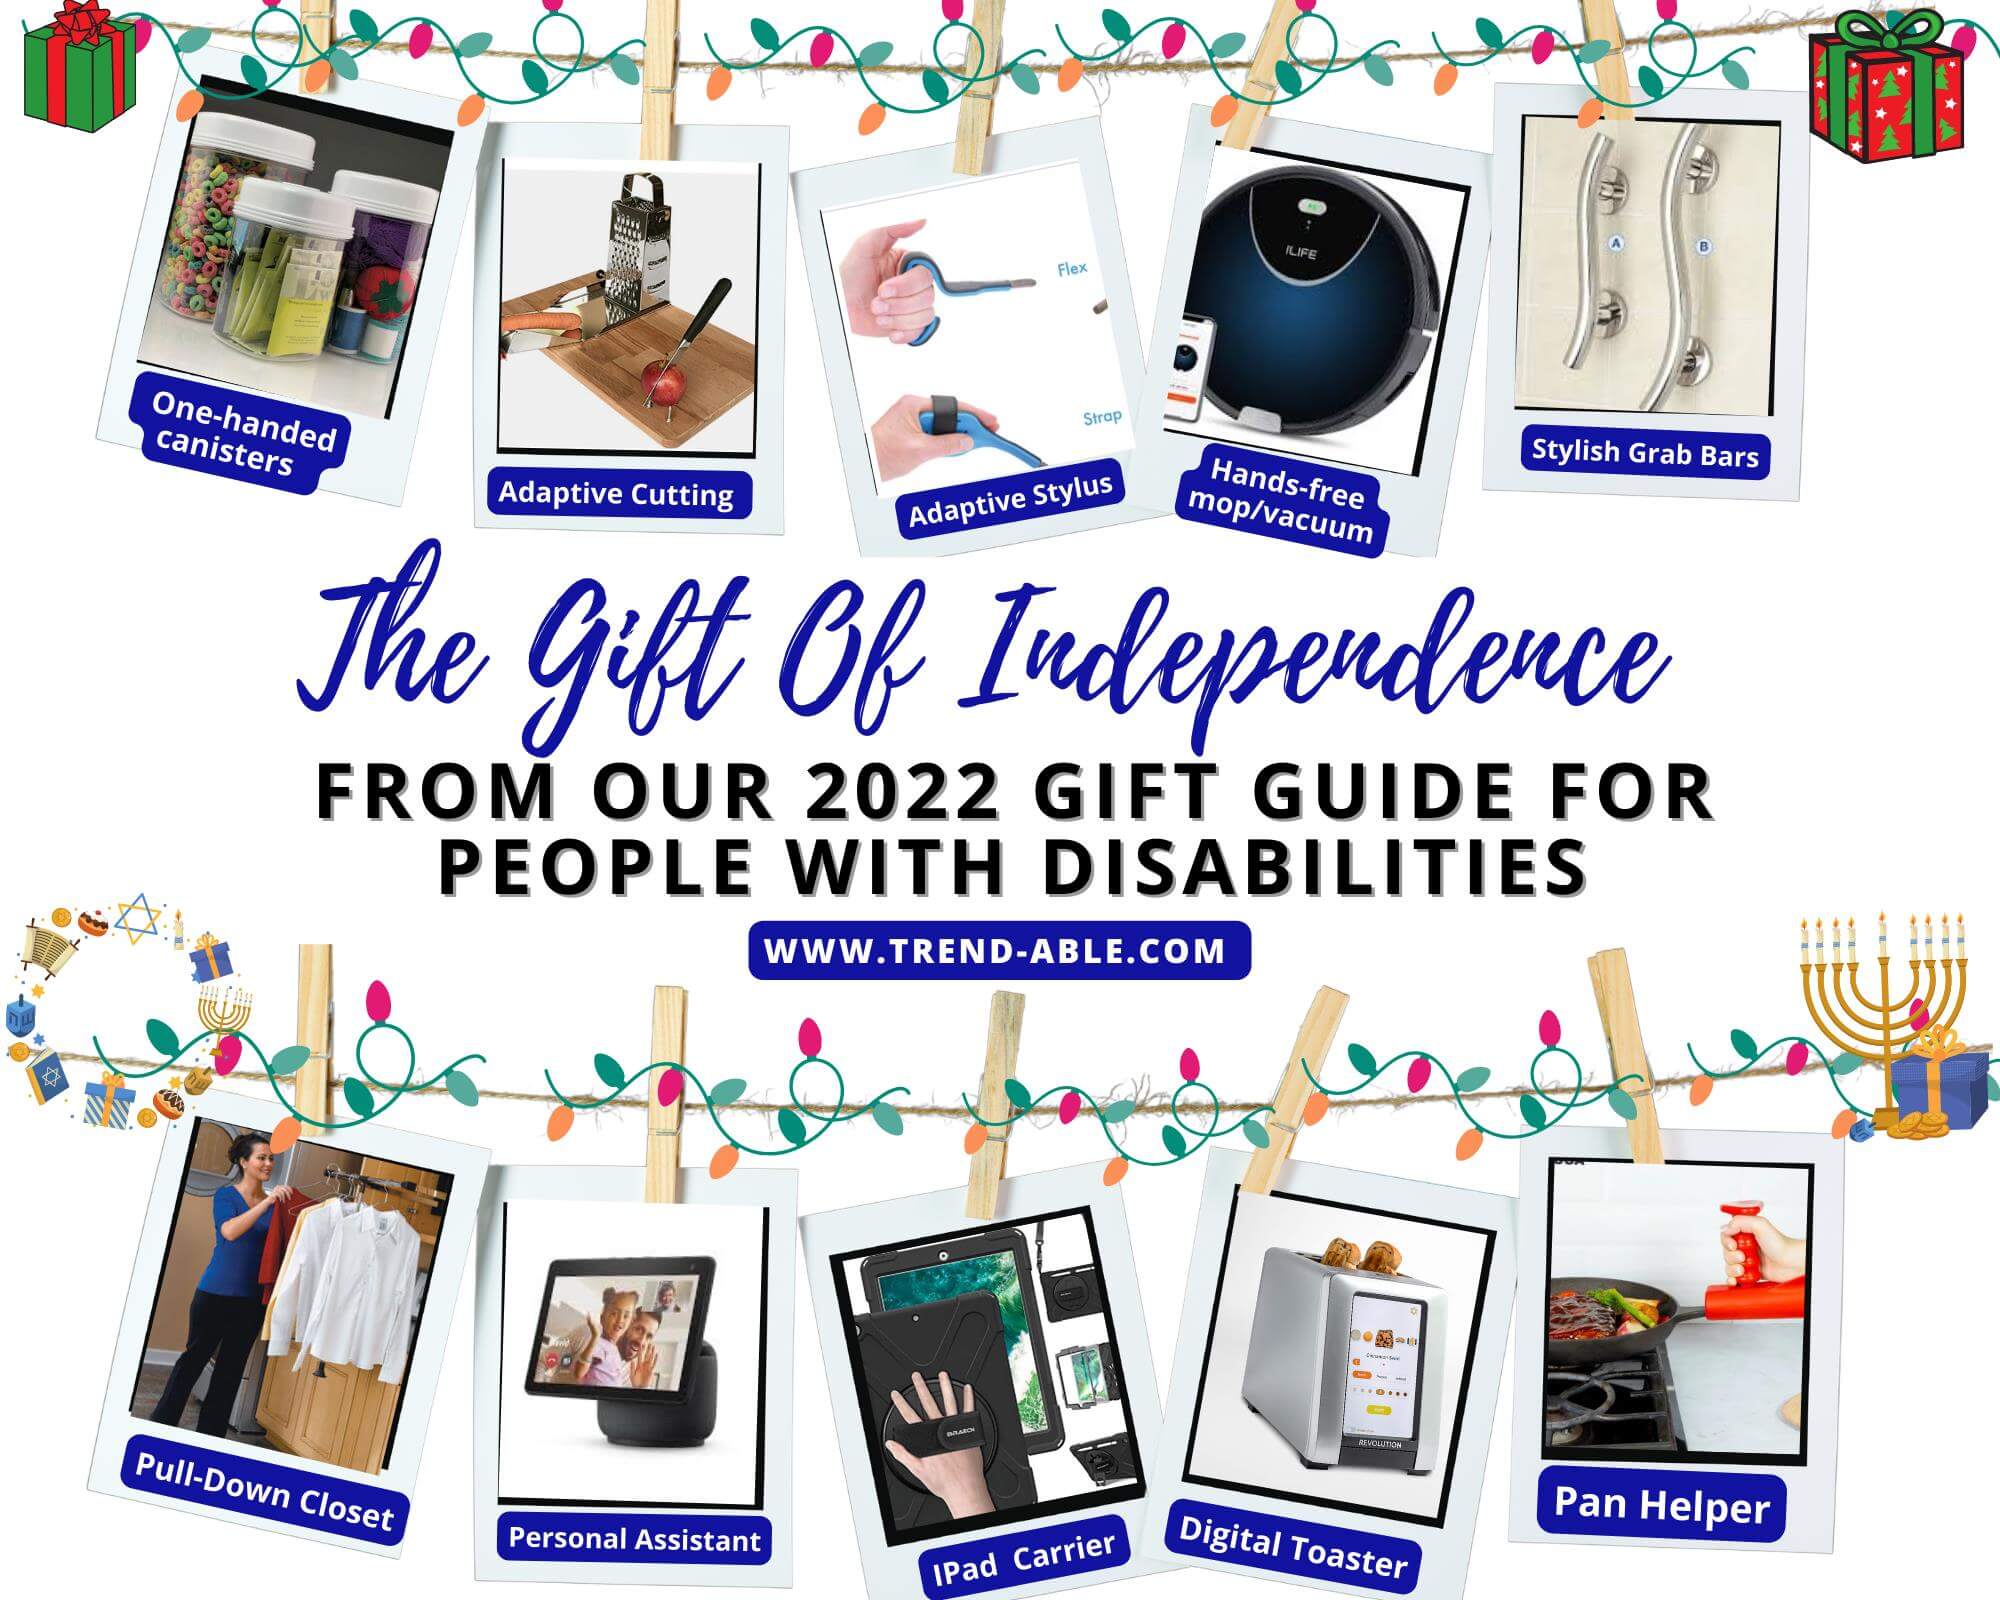 TREND-ABLE HOLIDAY GIFT GUIDE 2022